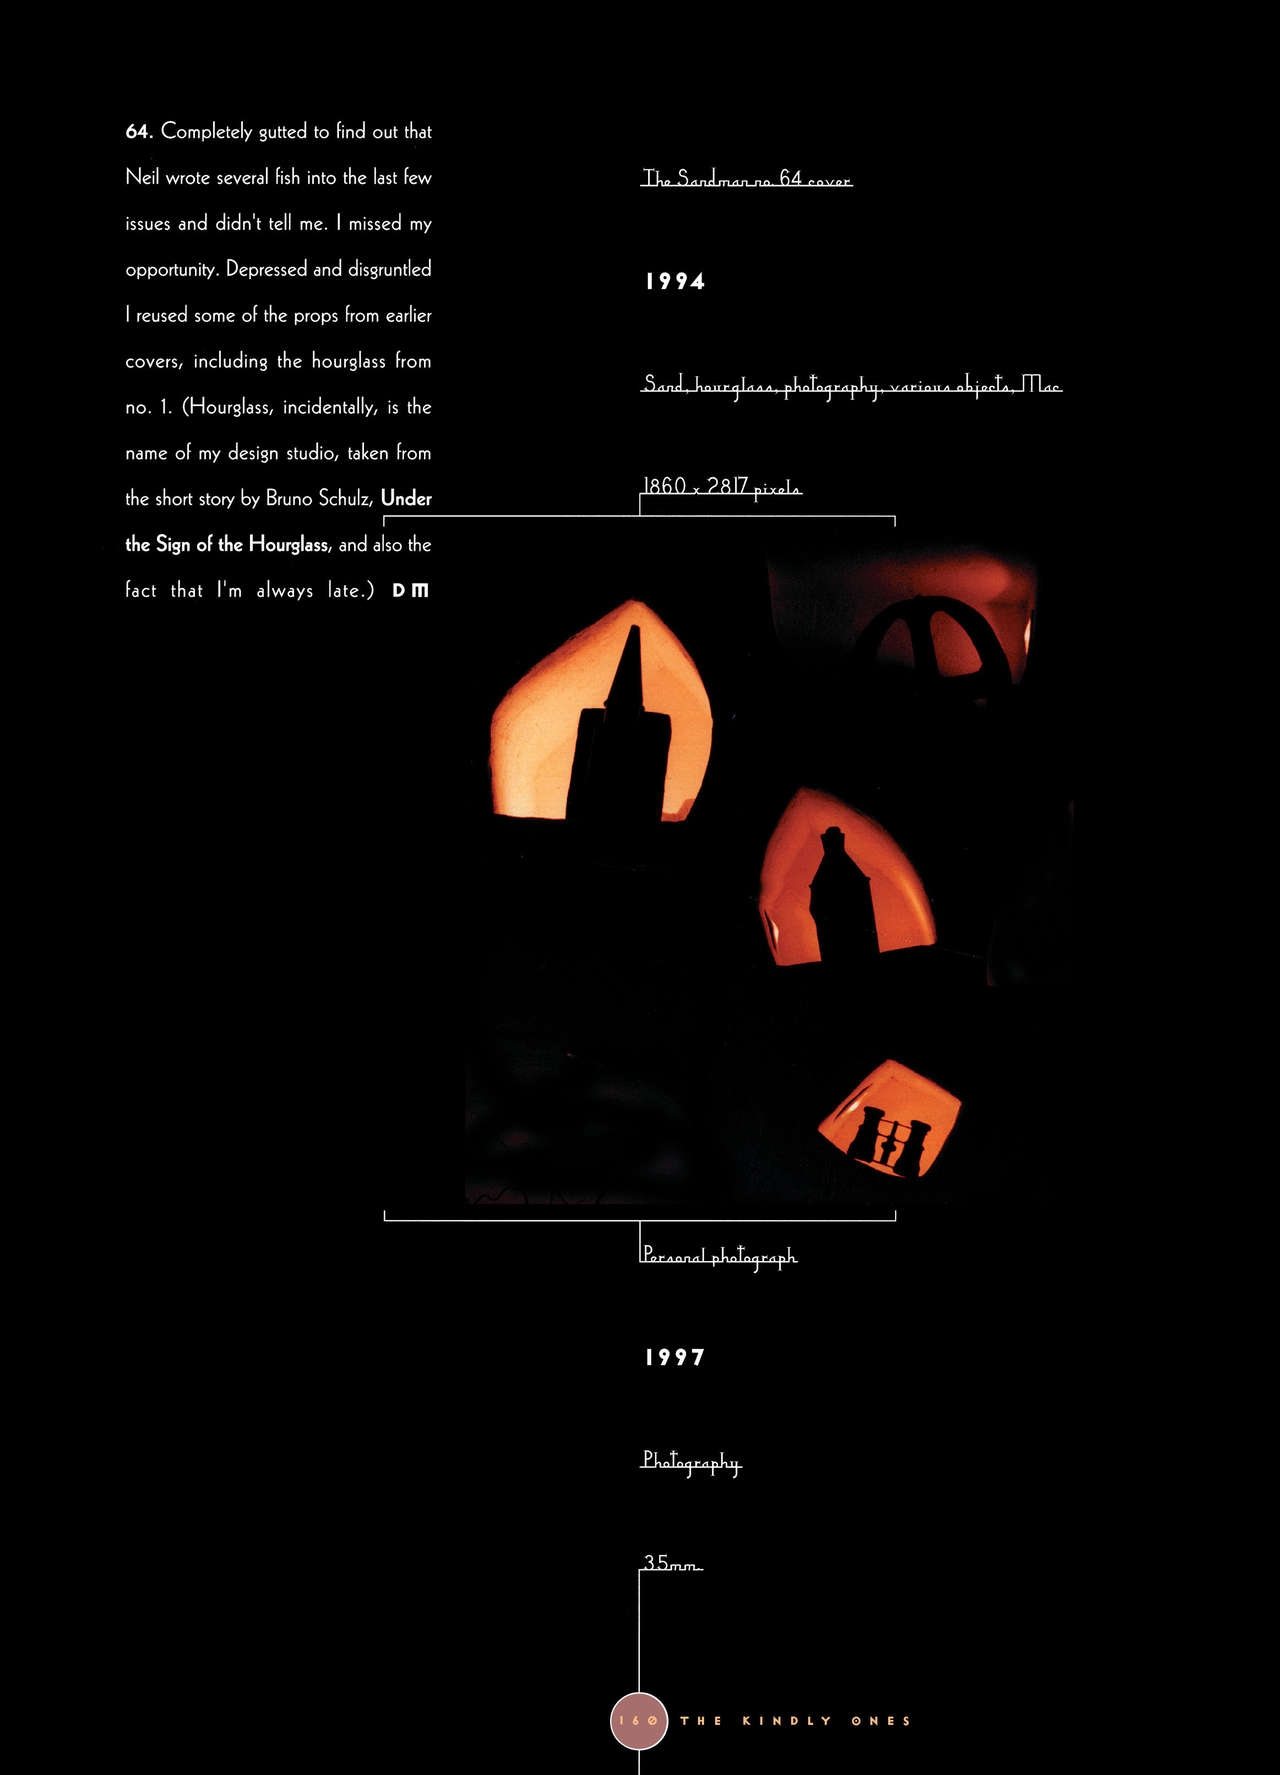 [Dave McKean] Dust Covers - The Collected Sandman Covers 1989-1997 ]Digital] 158